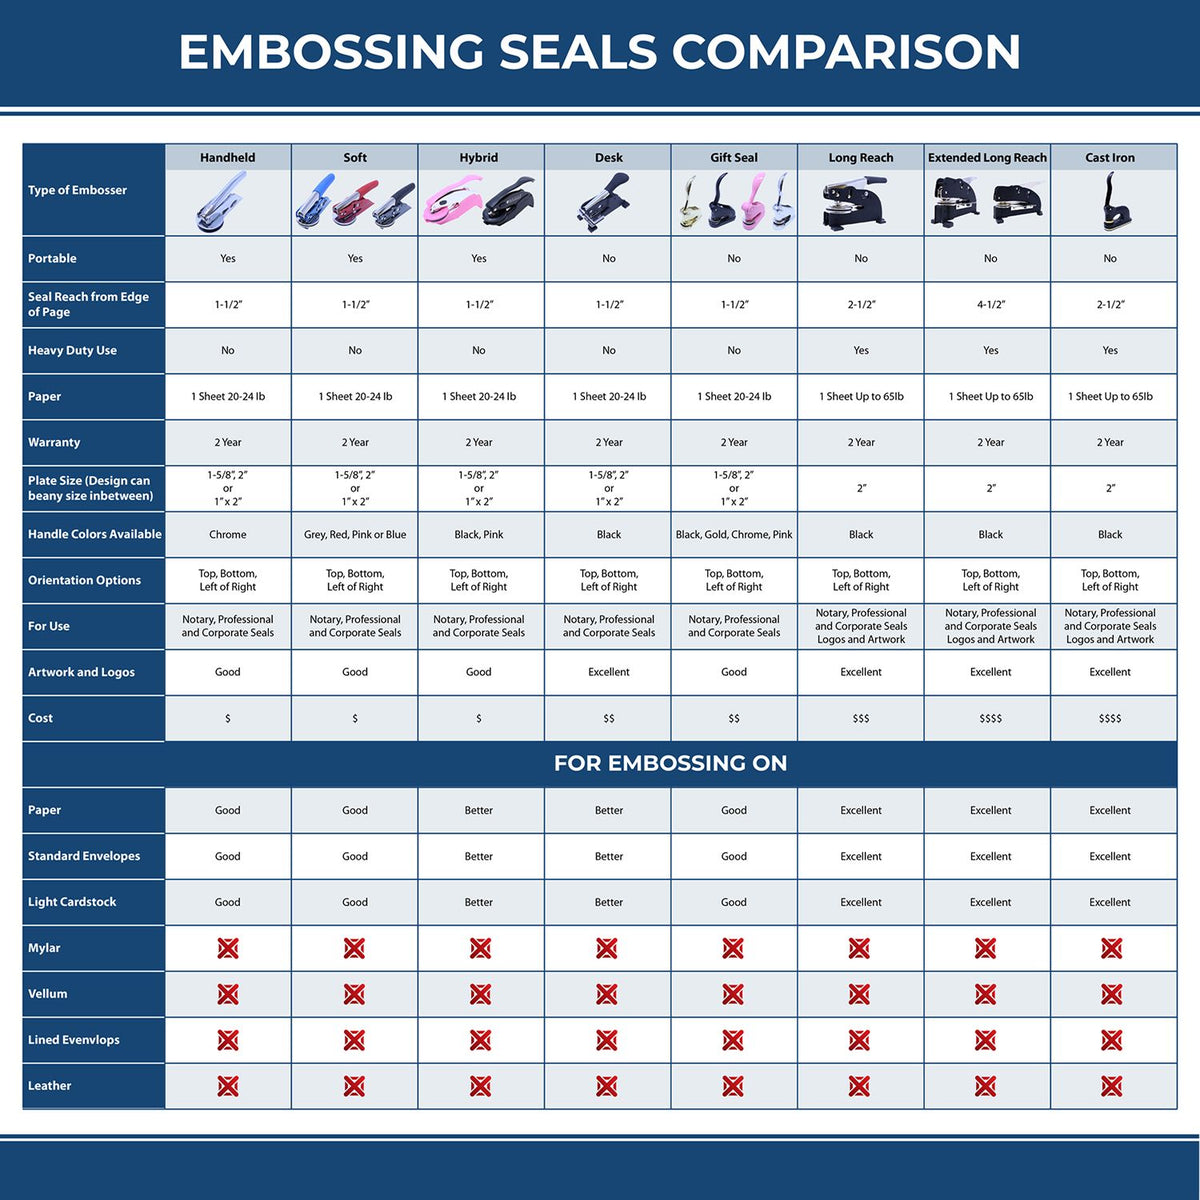 A comparison chart for the different types of mount models available for the Hybrid New Hampshire Engineer Seal